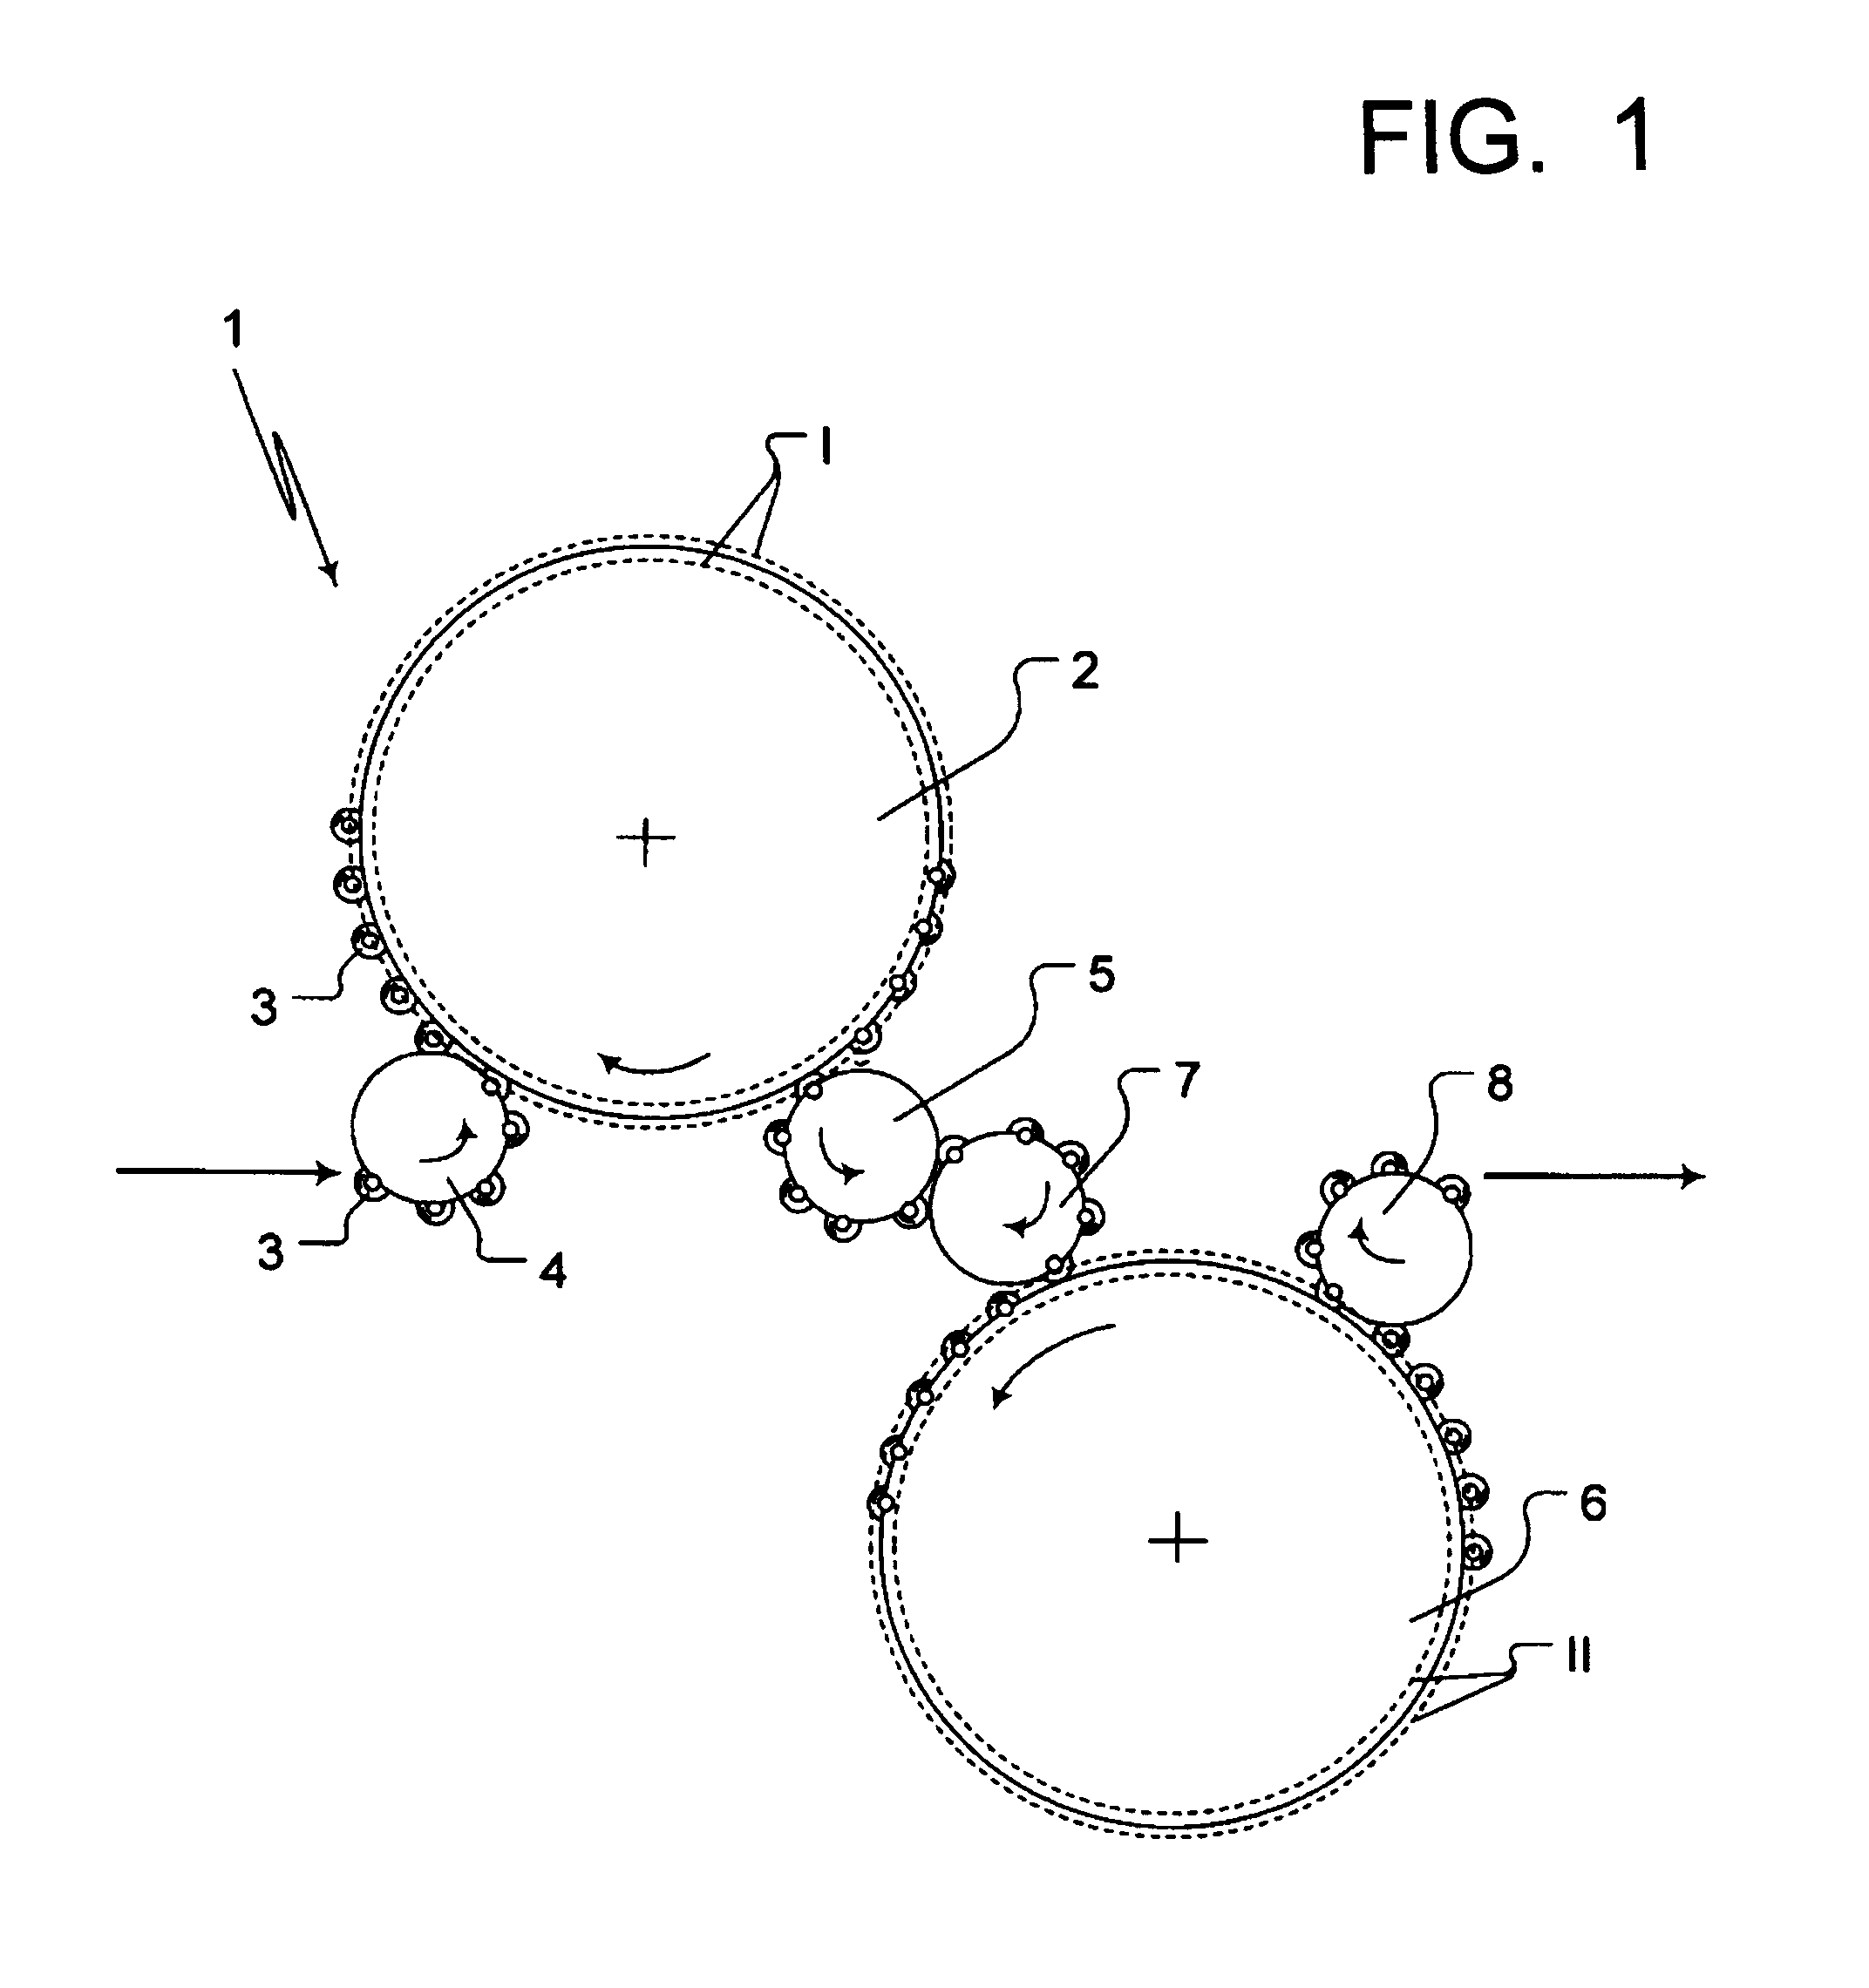 Procedure and apparatus for the treating containers such as plastic bottles in a bottle filling plant or containers in a container filling plant